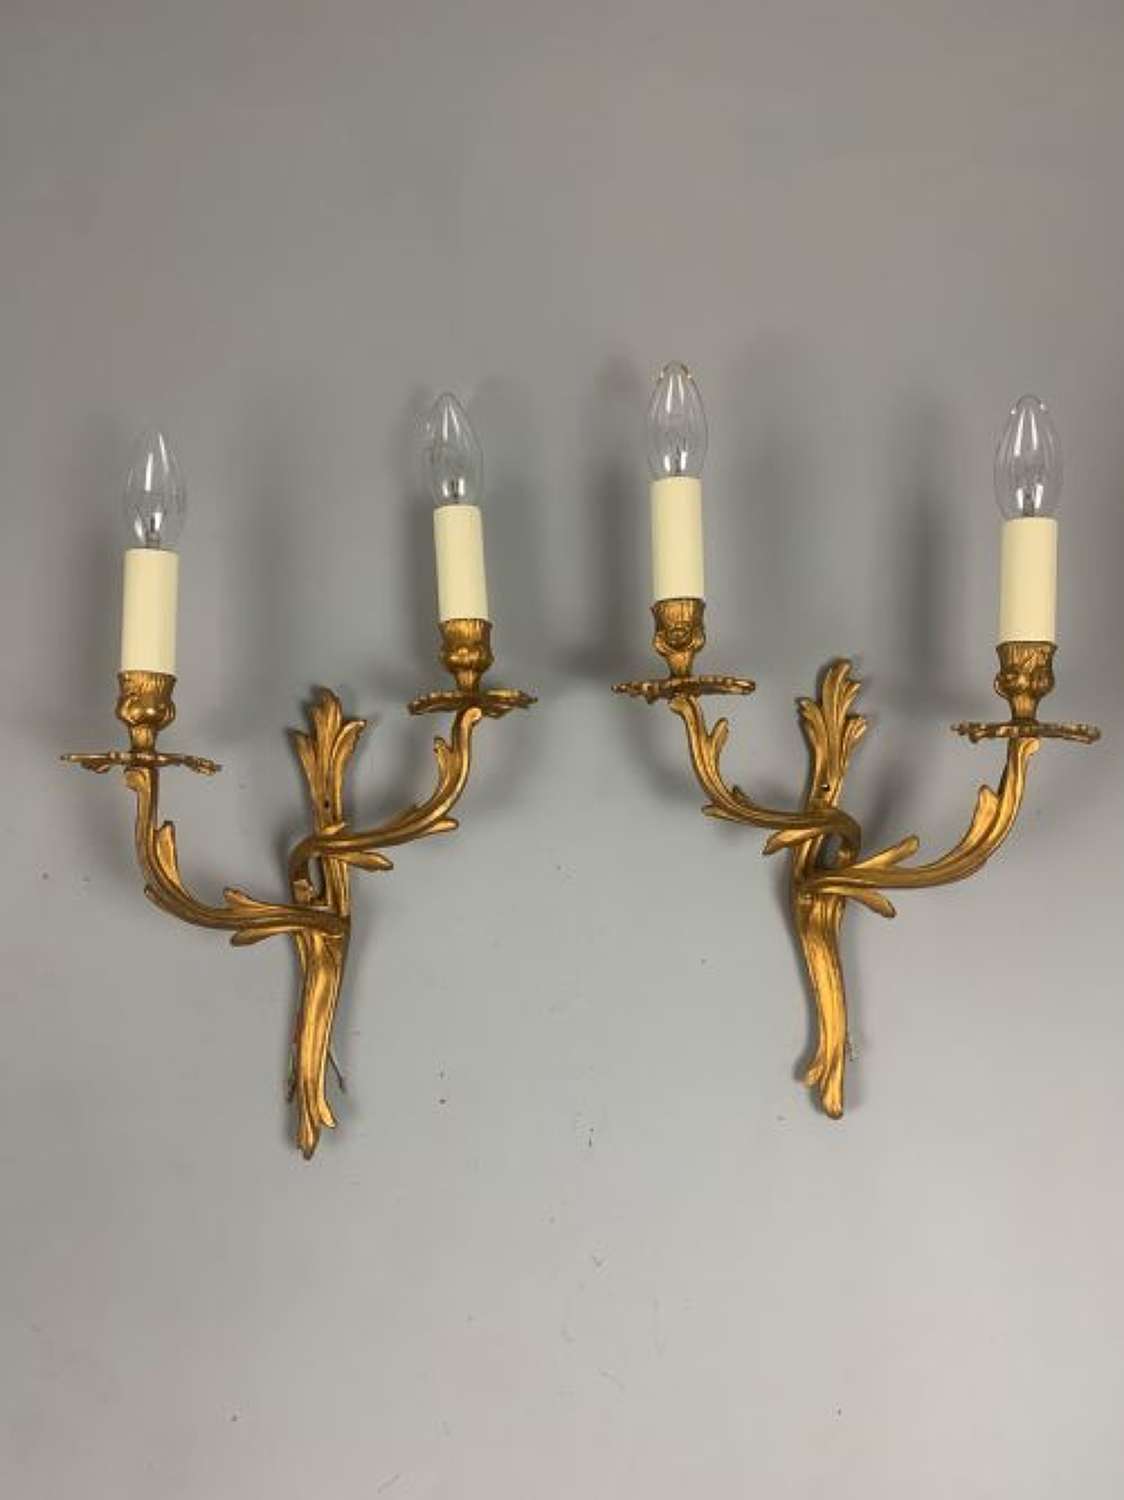 Pair of French Gilt Brass Antique Wall Lights